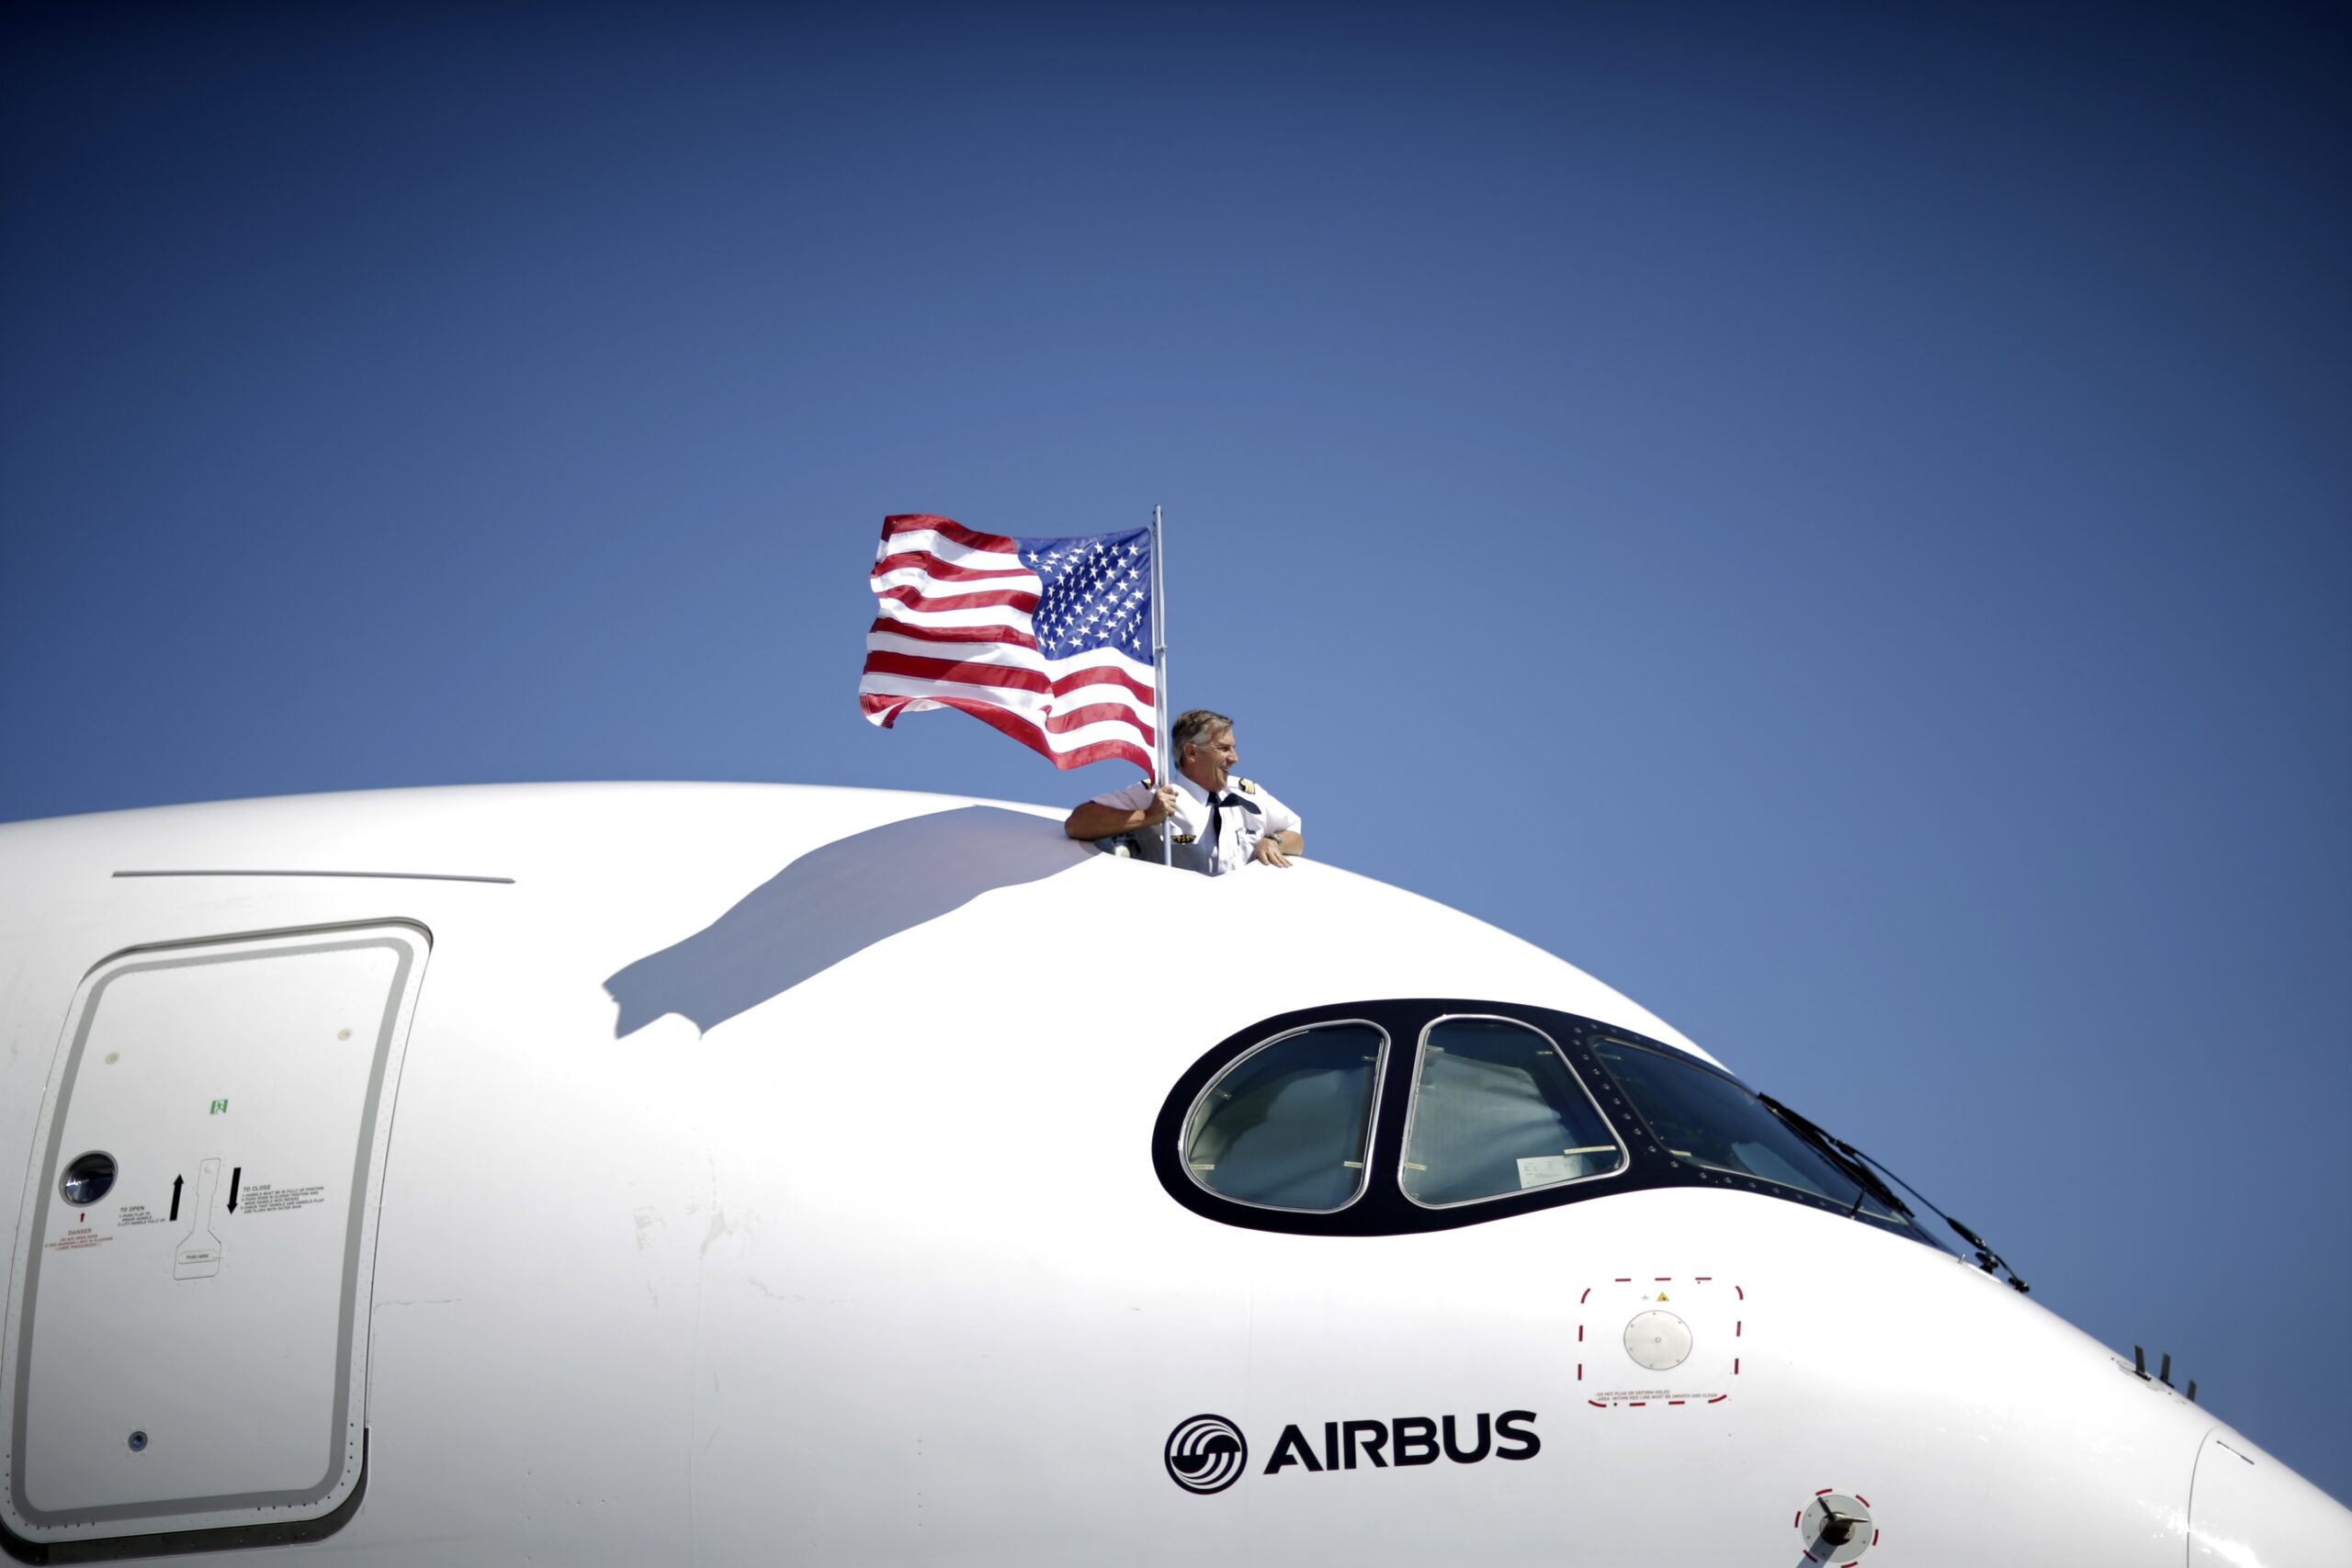 The public was able to see a new Airbus plane at EAA Airventure in 2015